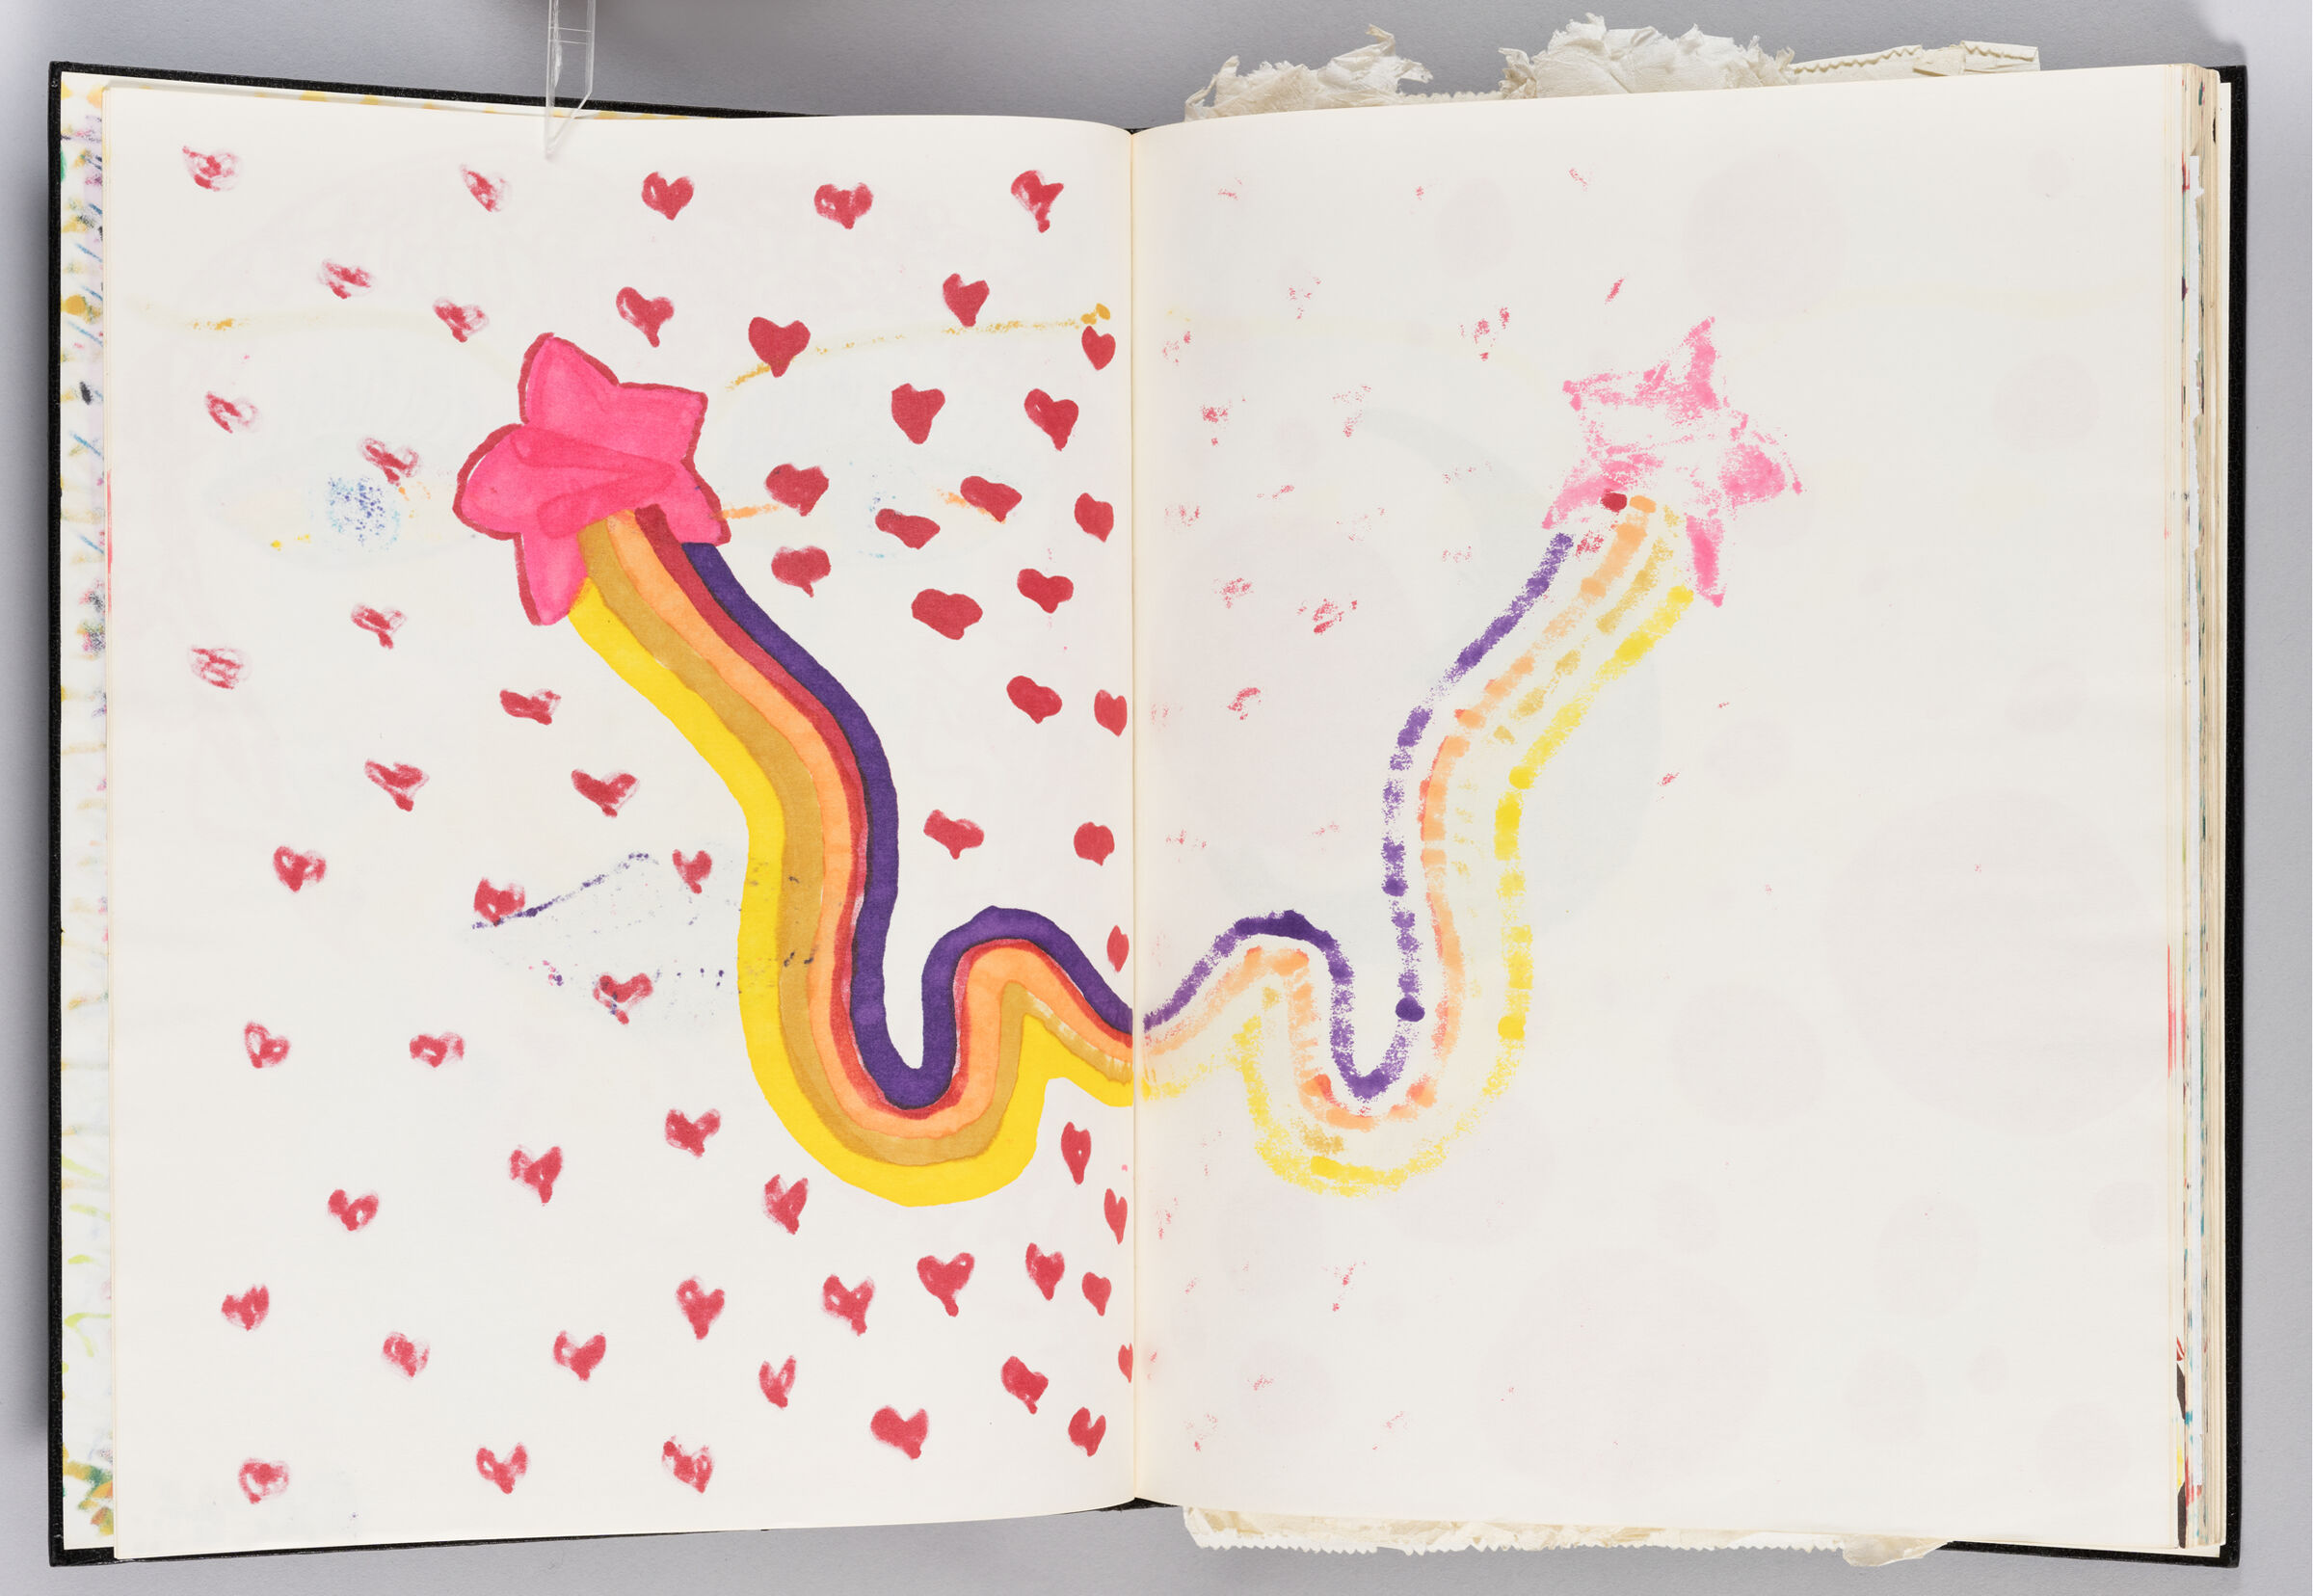 Untitled (Children's Drawing, Left Page); Untitled (Bleed-Through, Right Page)